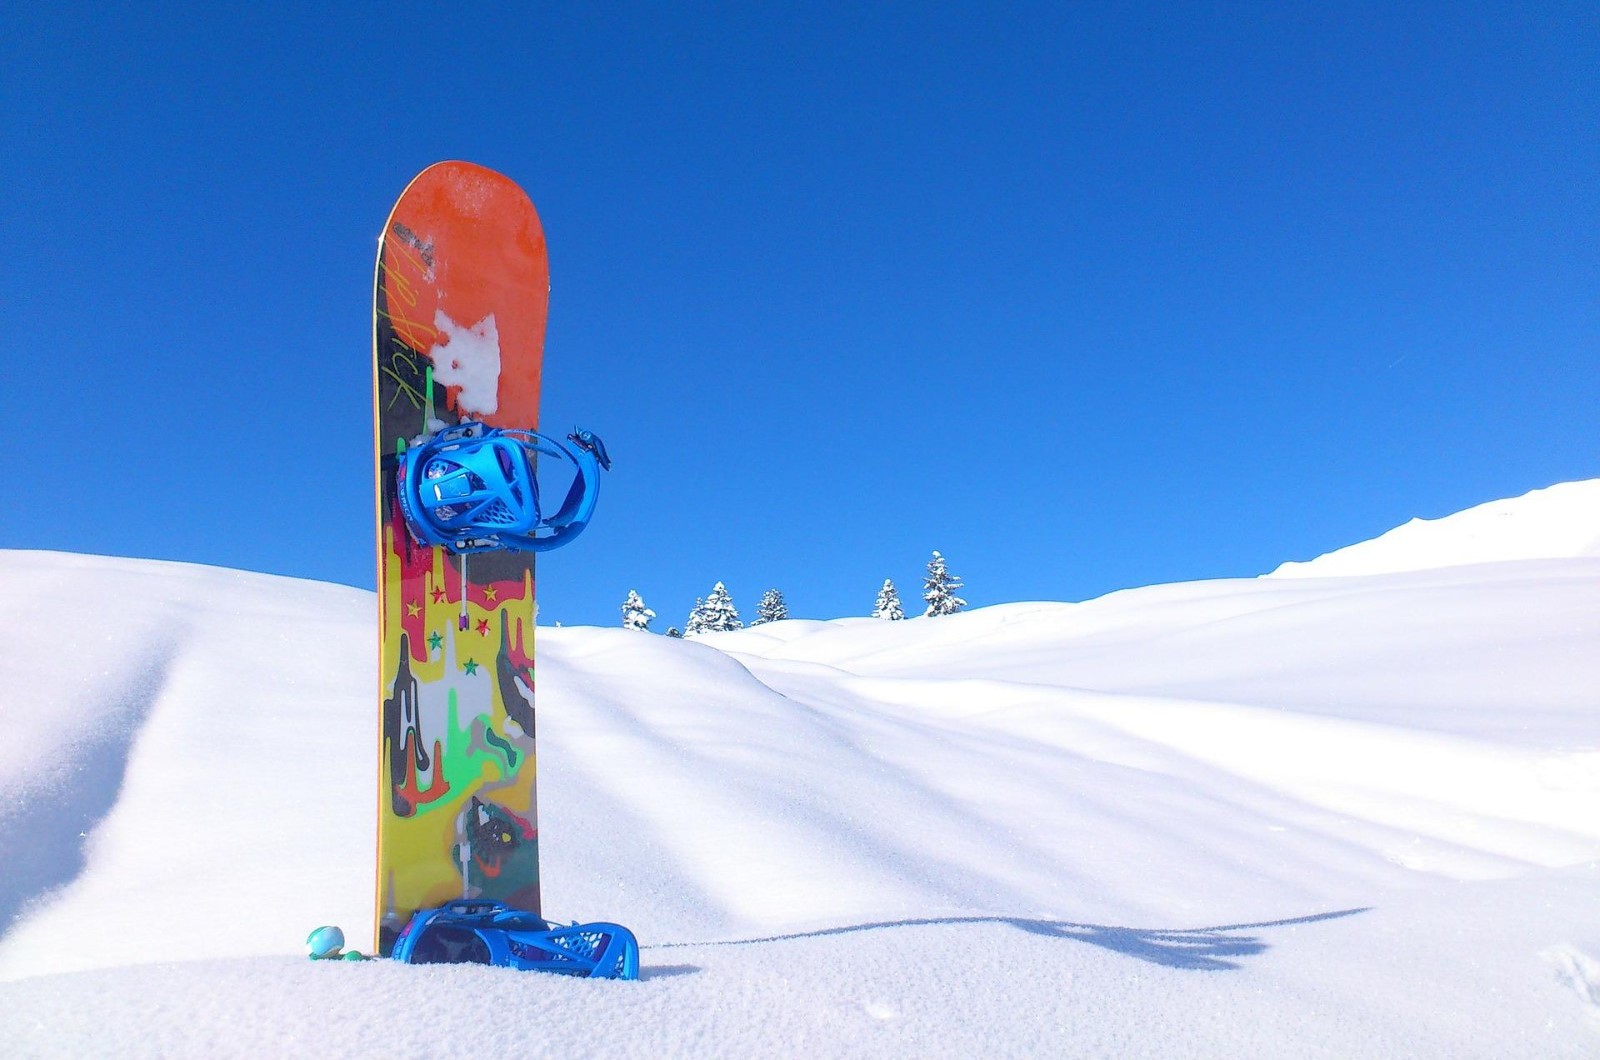 Snowboard Review: Unbiased Analysis and Recommendations